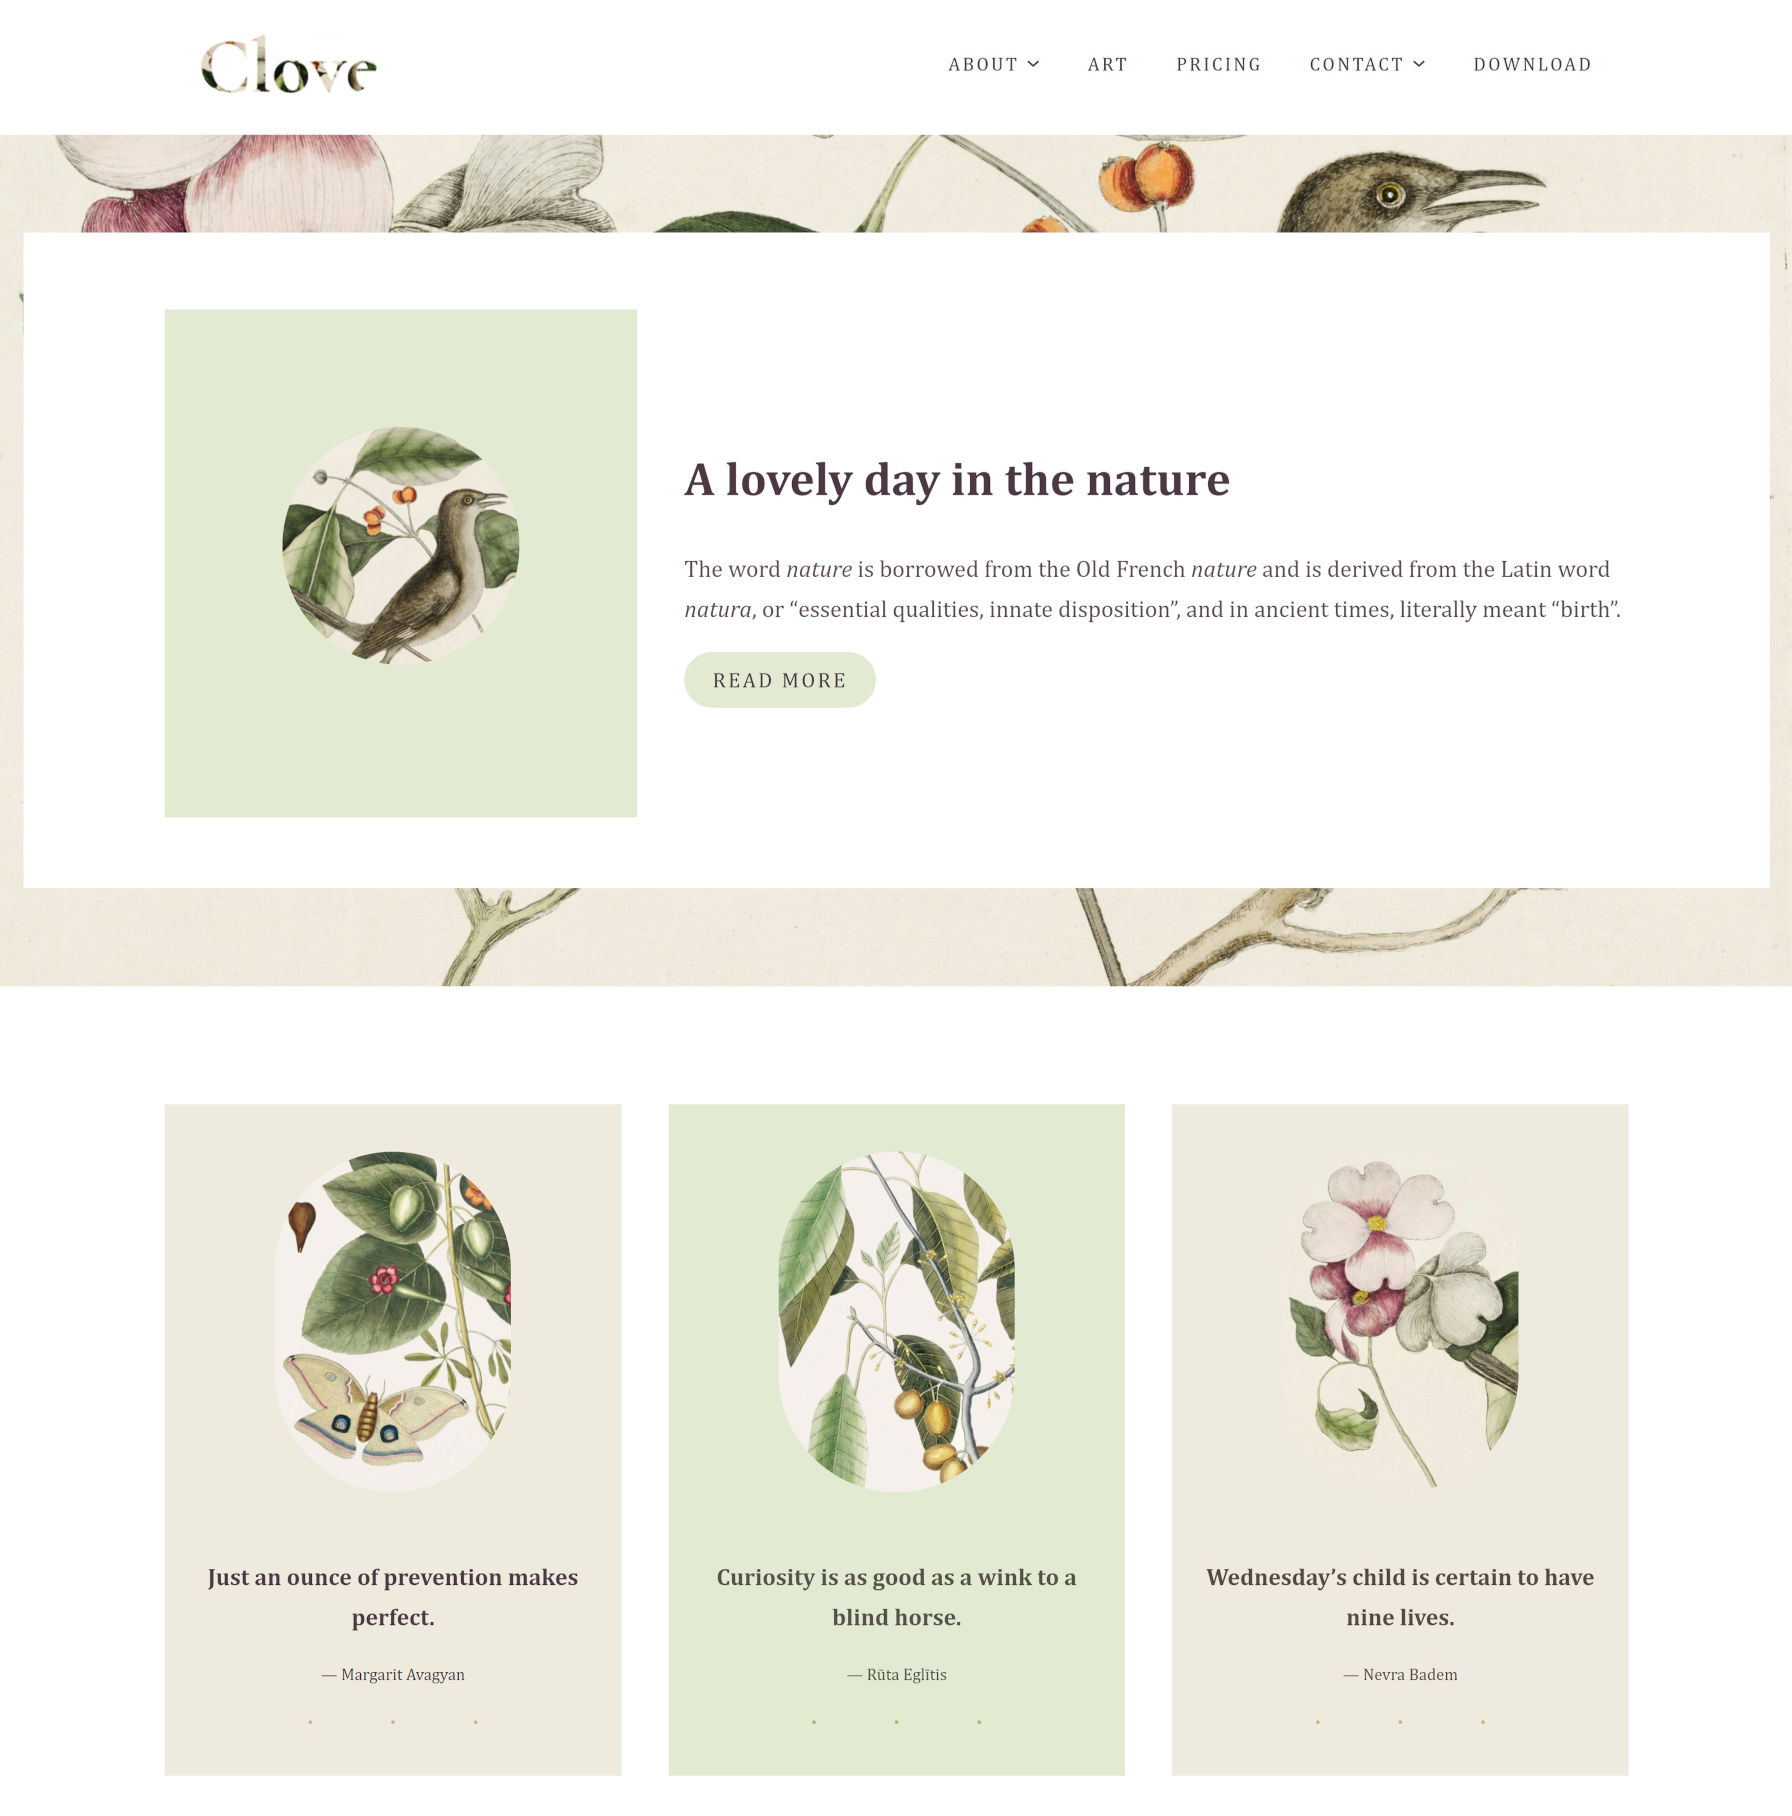 clove-homepage The WordPress Block Theme Revolution Is Quietly Picking Up Momentum design tips